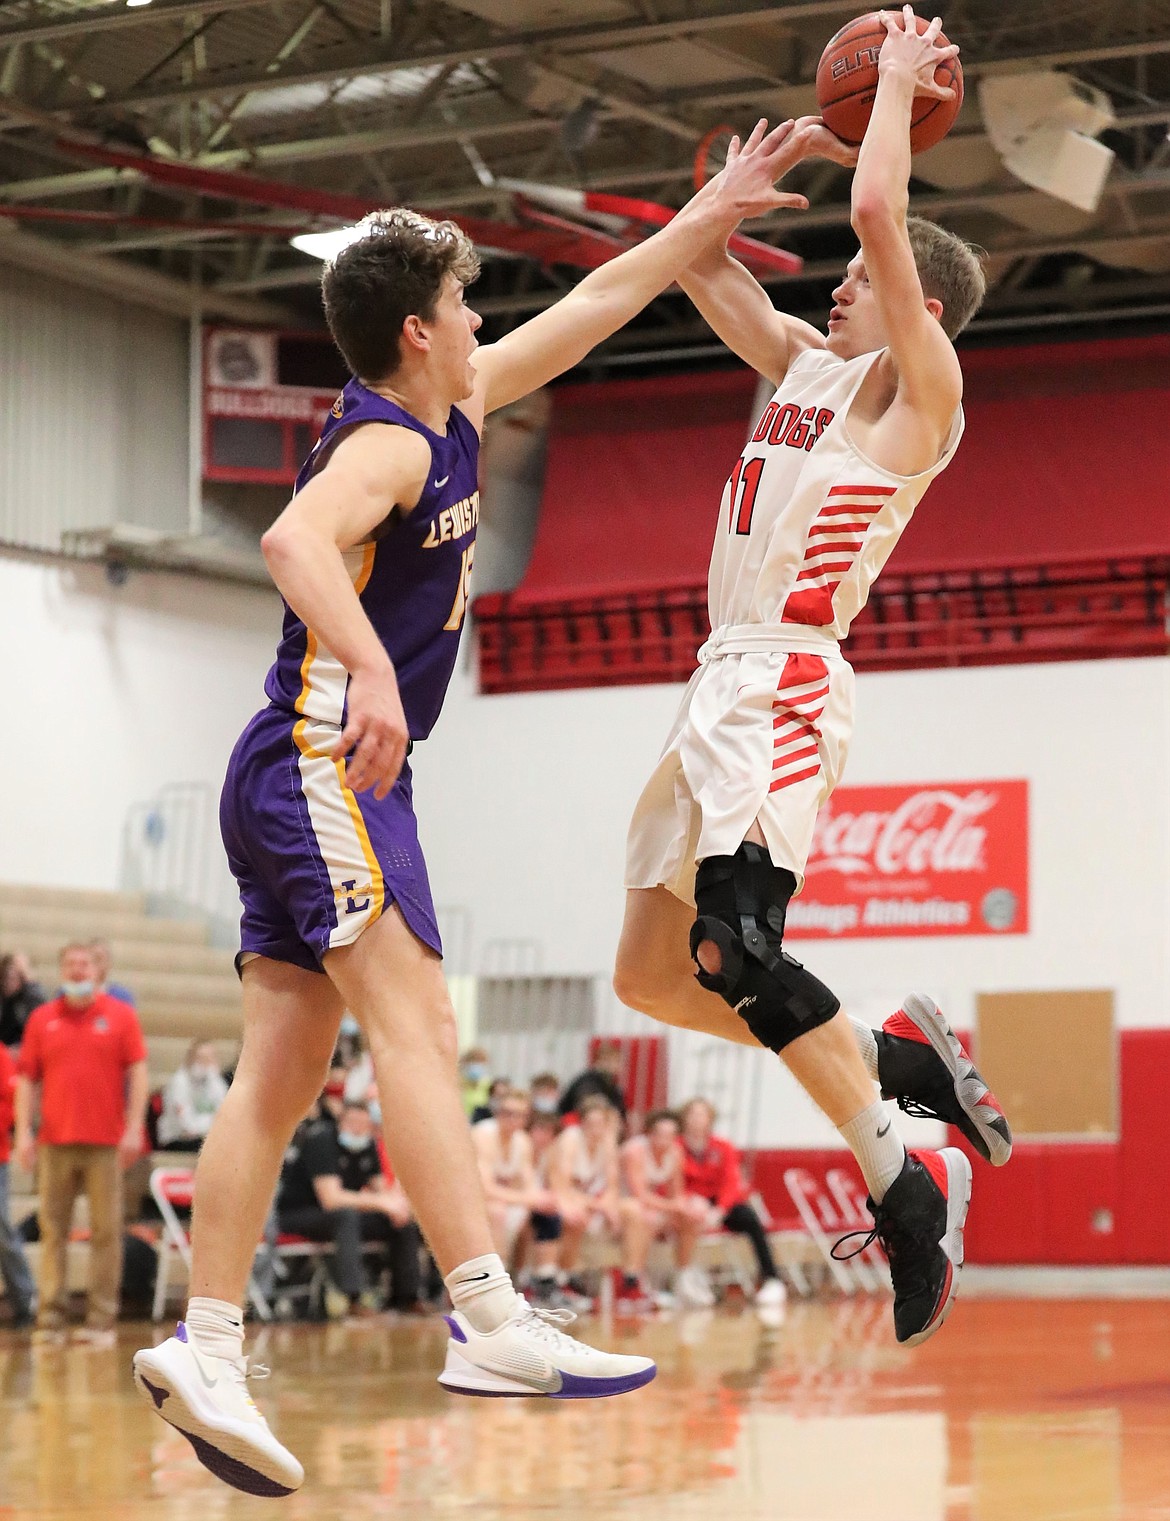 Darren Bailey attempts a shot over a Lewiston defender on Saturday.